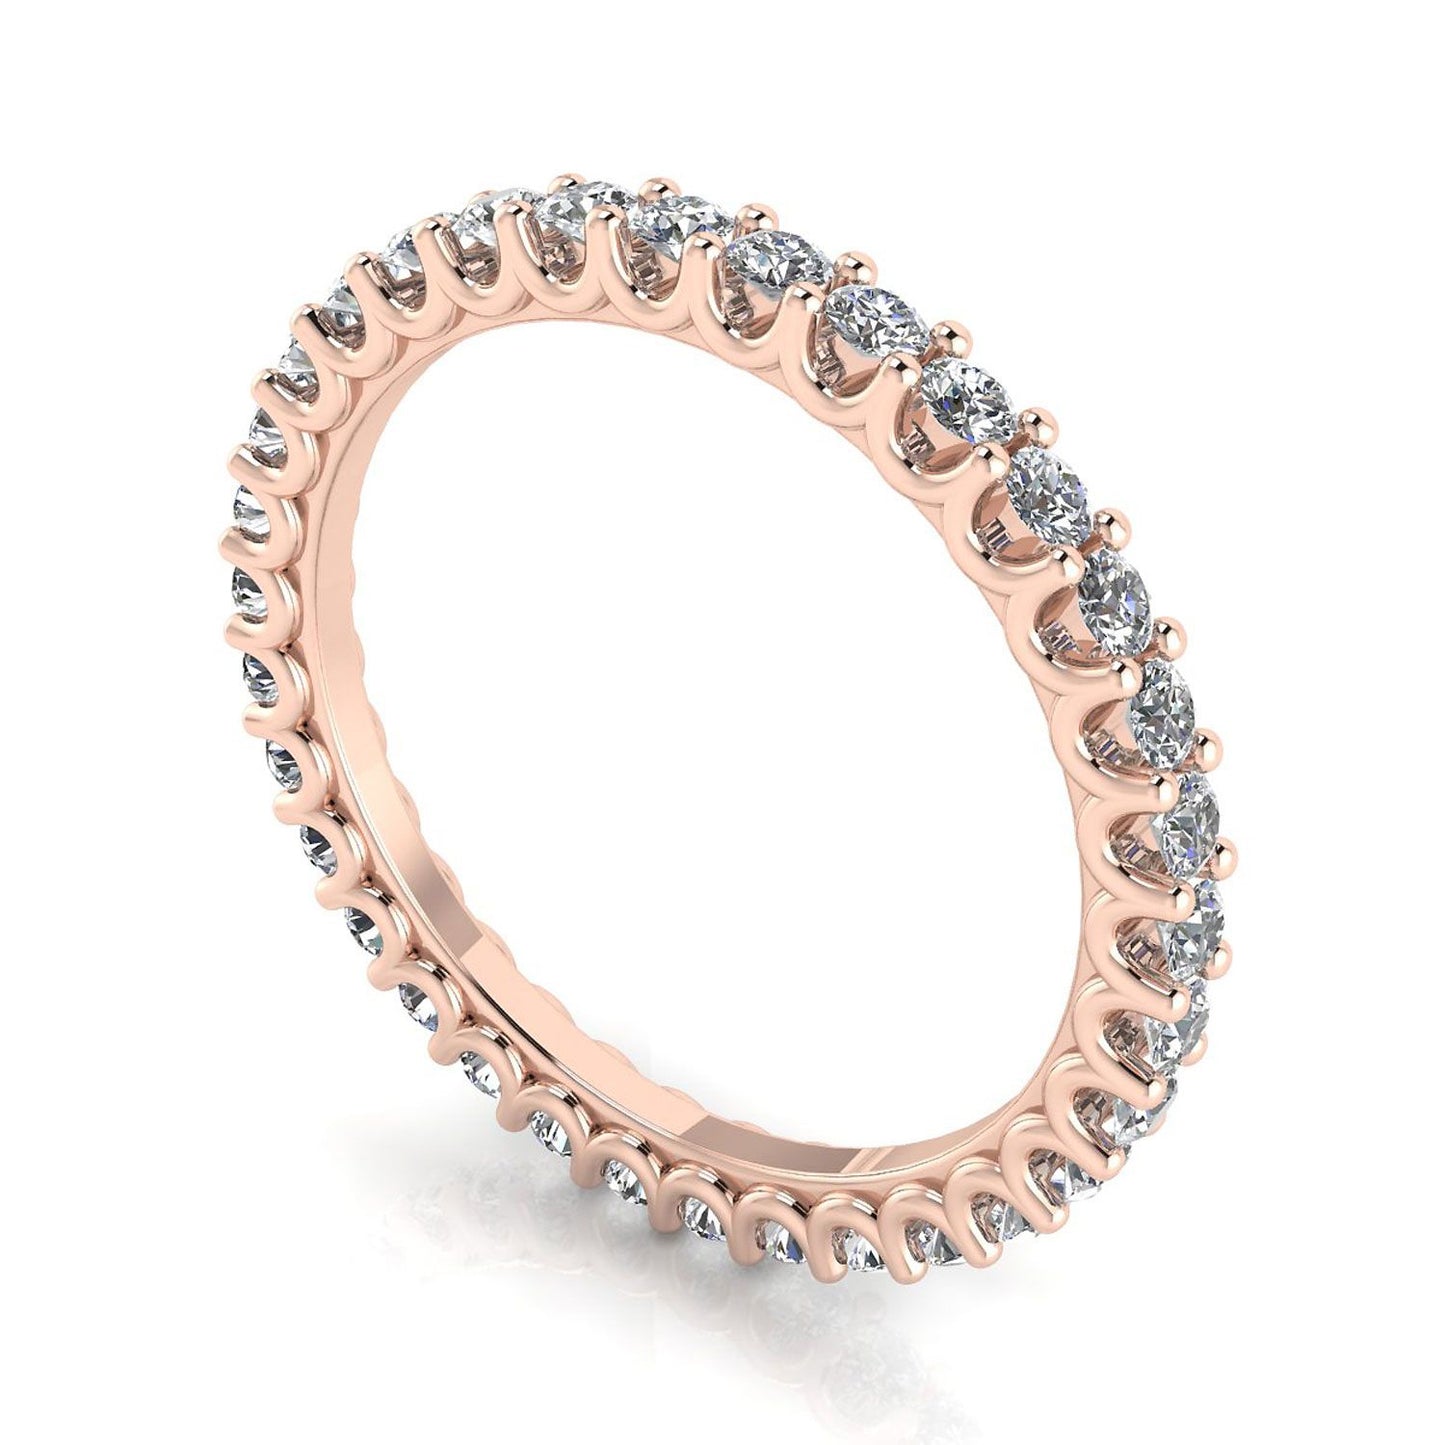 Round Brilliant Cut Diamond Shared Prong Set Eternity Ring In 14k Rose Gold  (0.43ct. Tw.) Ring Size 4.5